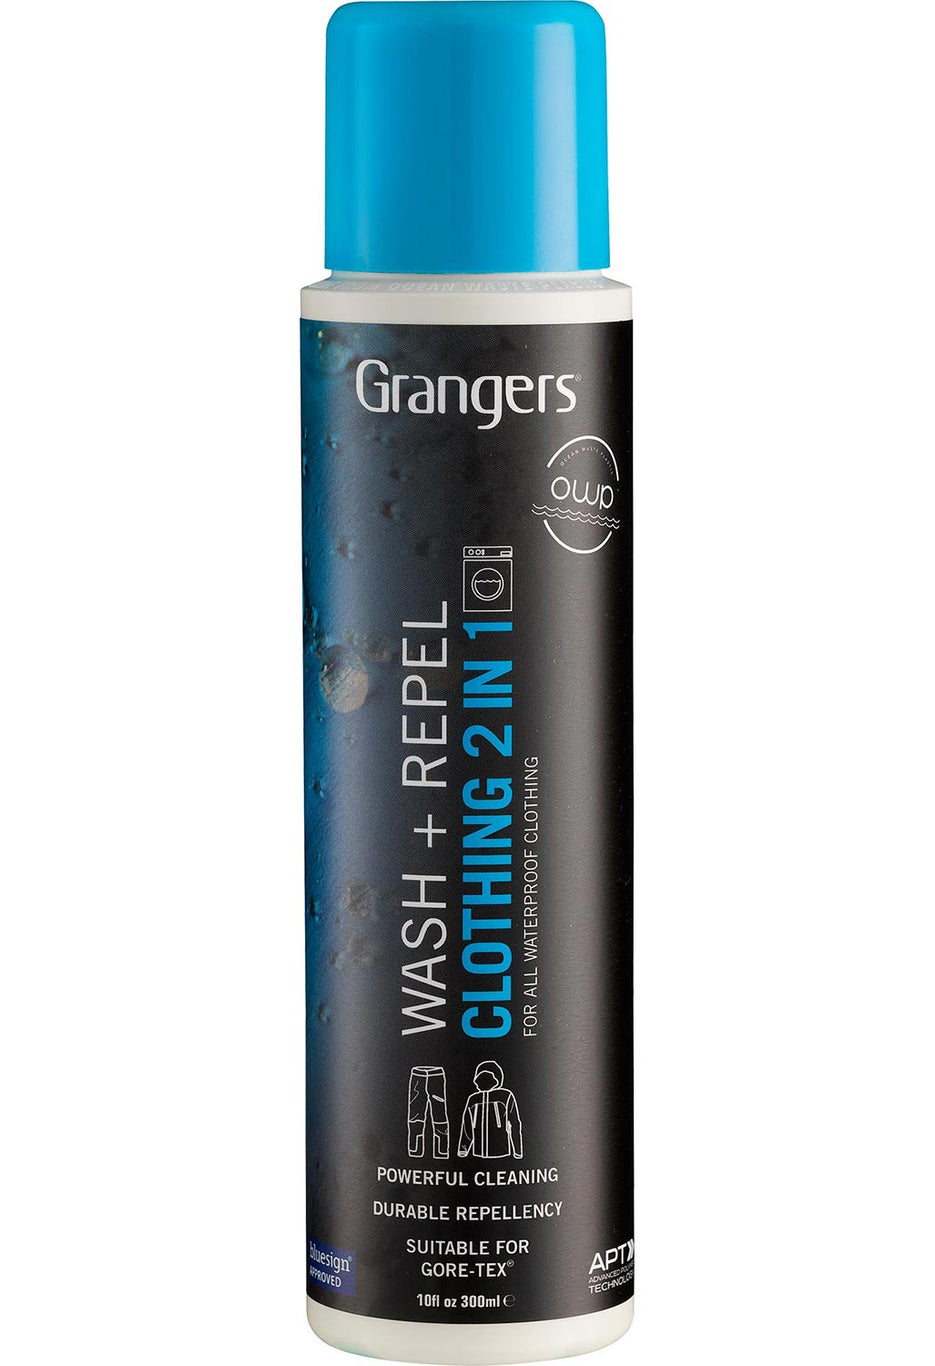 Grangers Wash + Repel Clothing 2 in 1 300ml 0